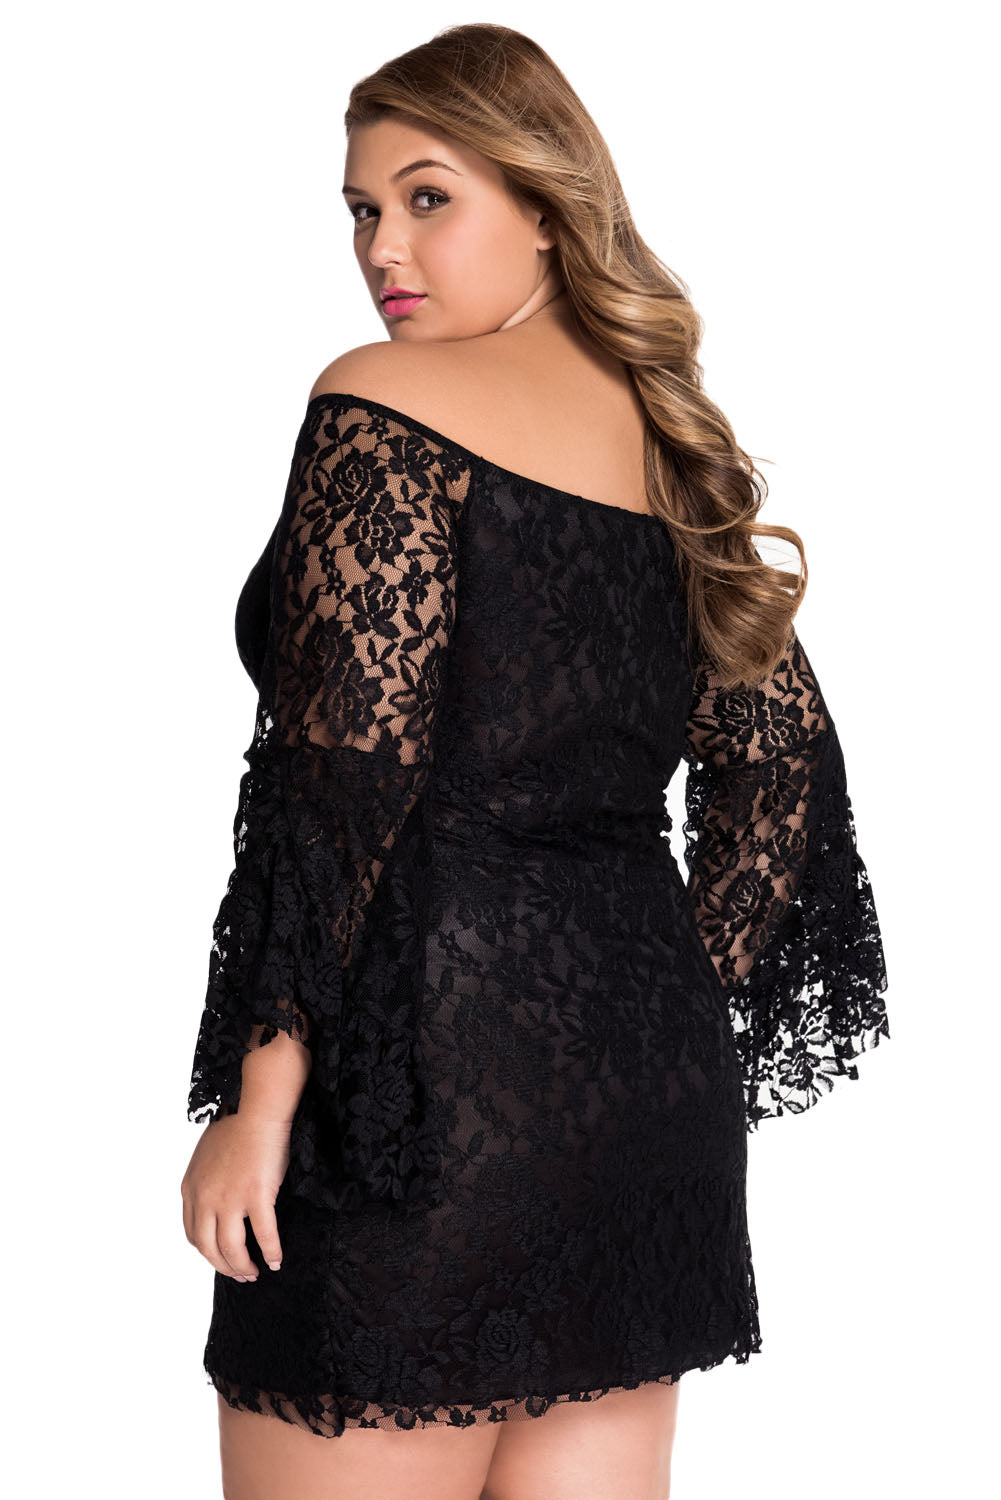 secy plus size clothing